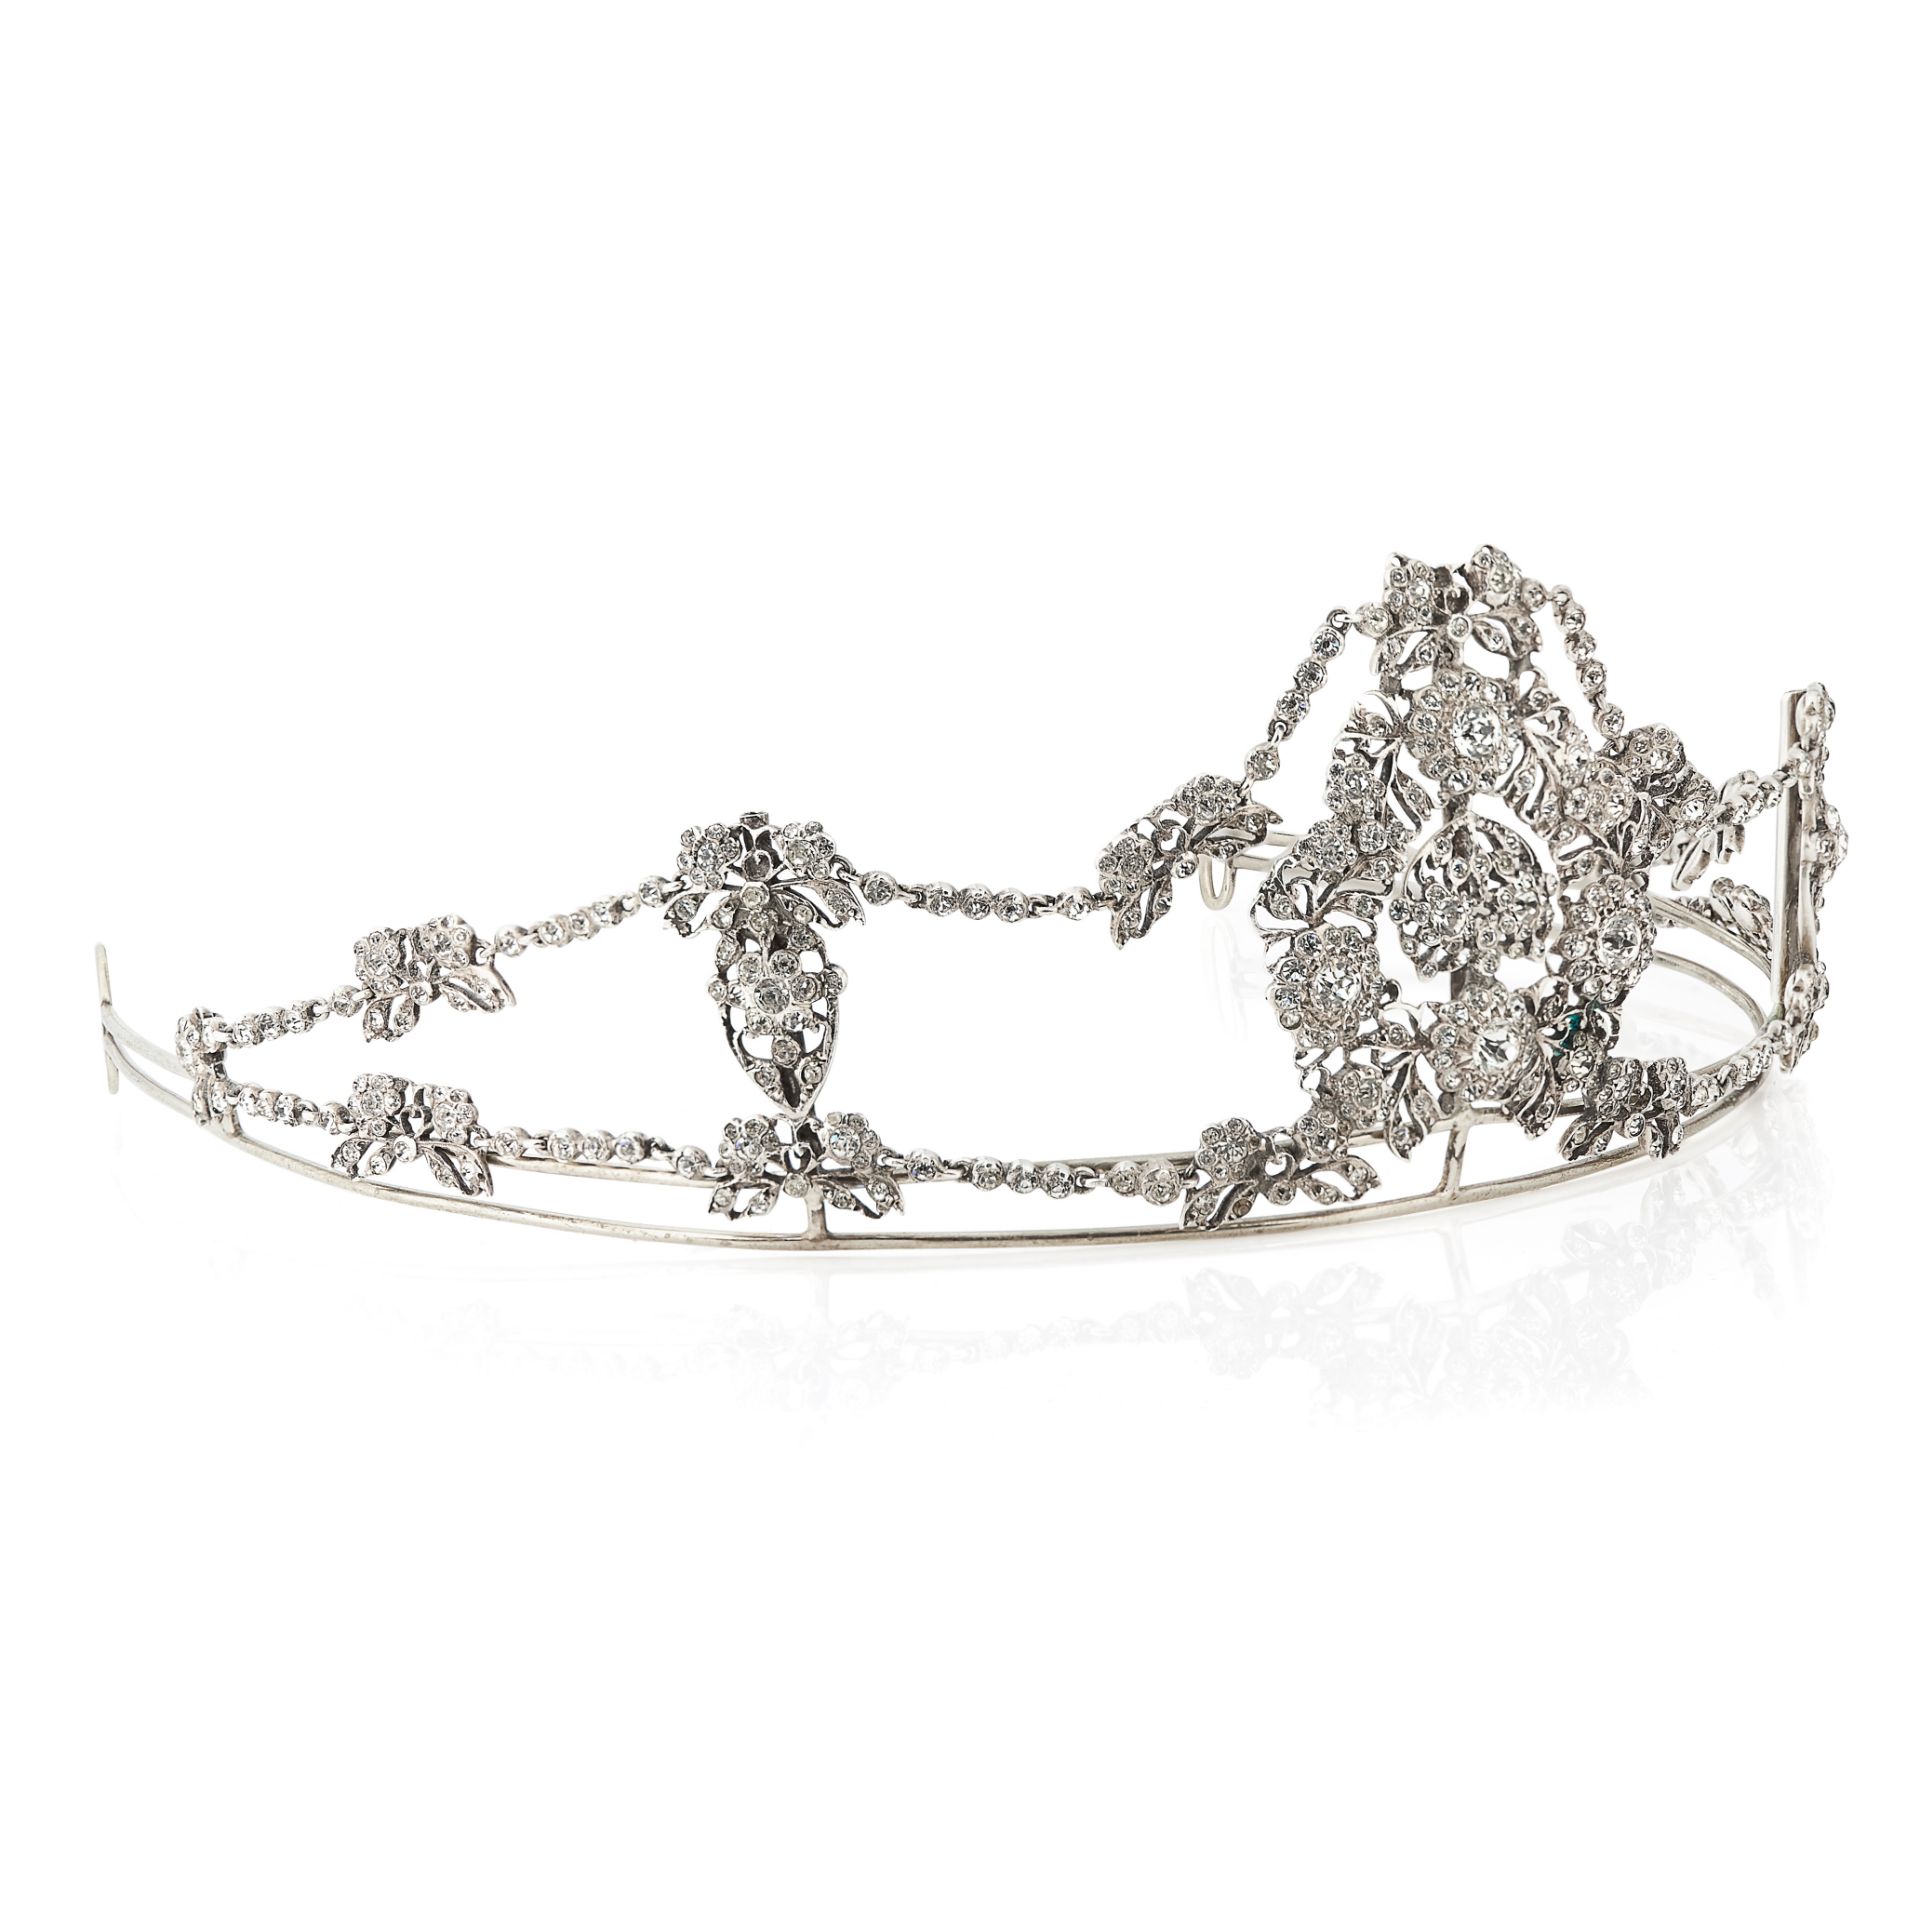 AN ANTIQUE PASTE DIAMOND TIARA the frame applied with five principal sections of foliate and - Image 2 of 3